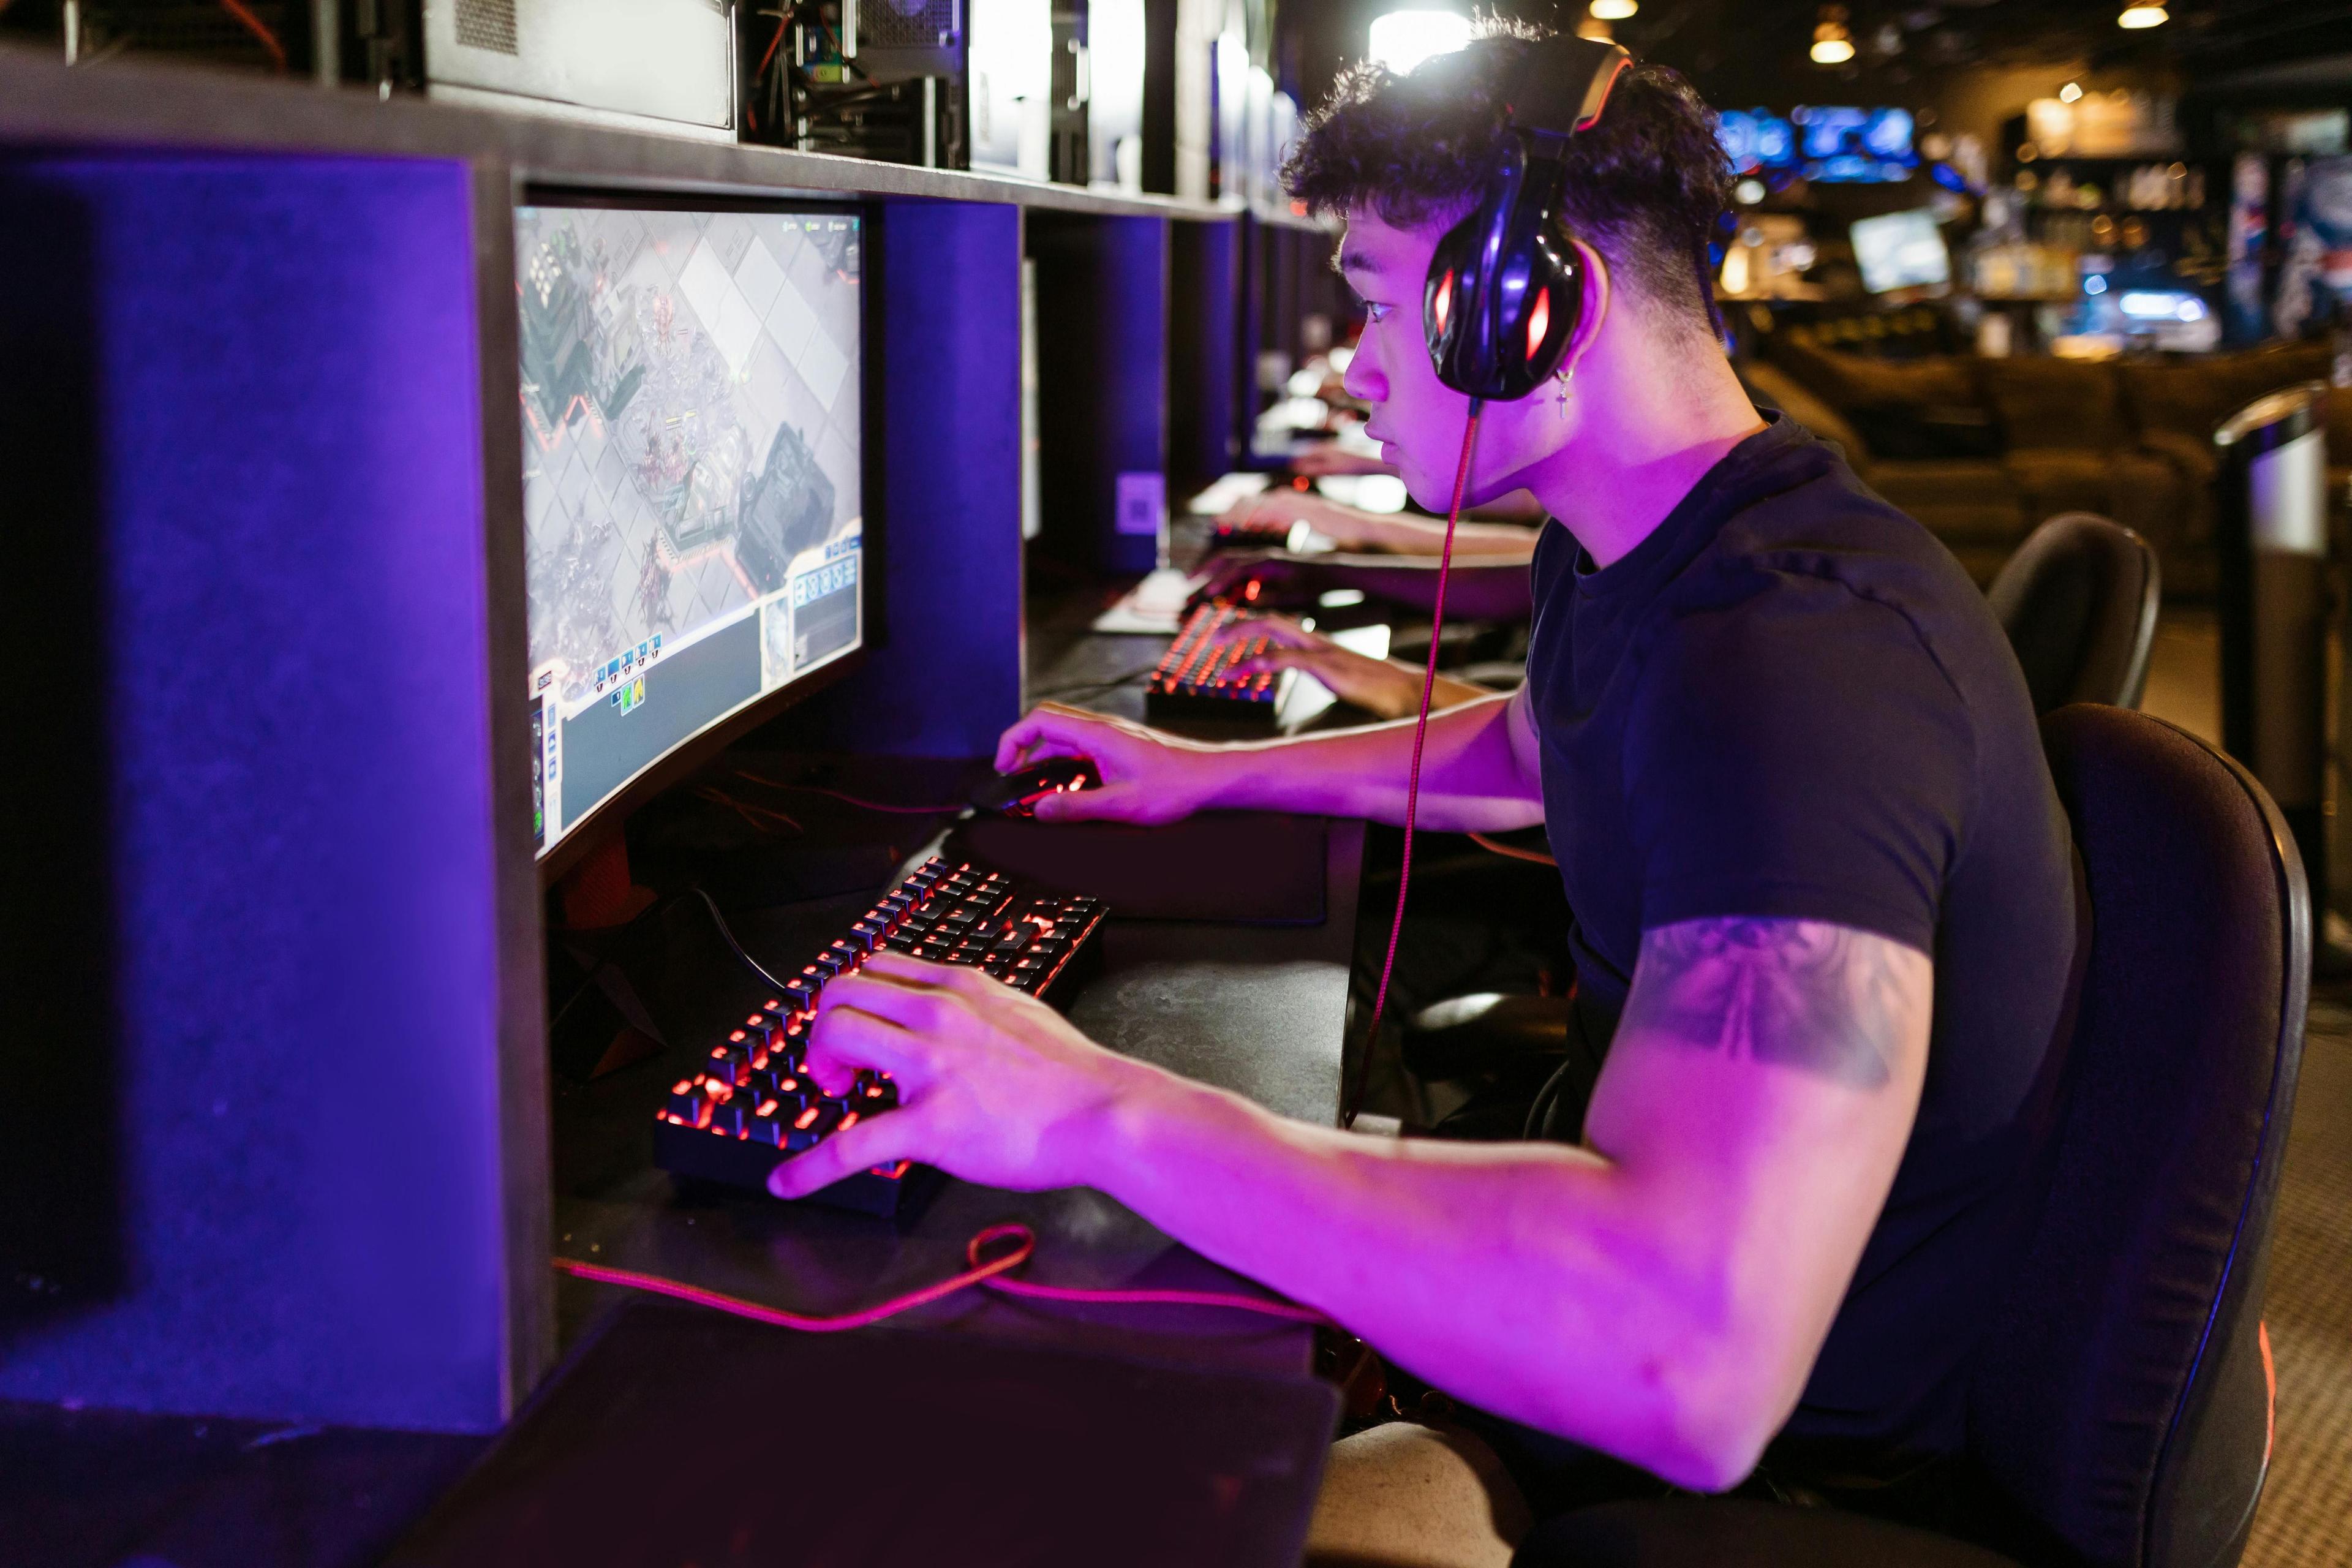 The role of e-sports organisations and their impact on the industry